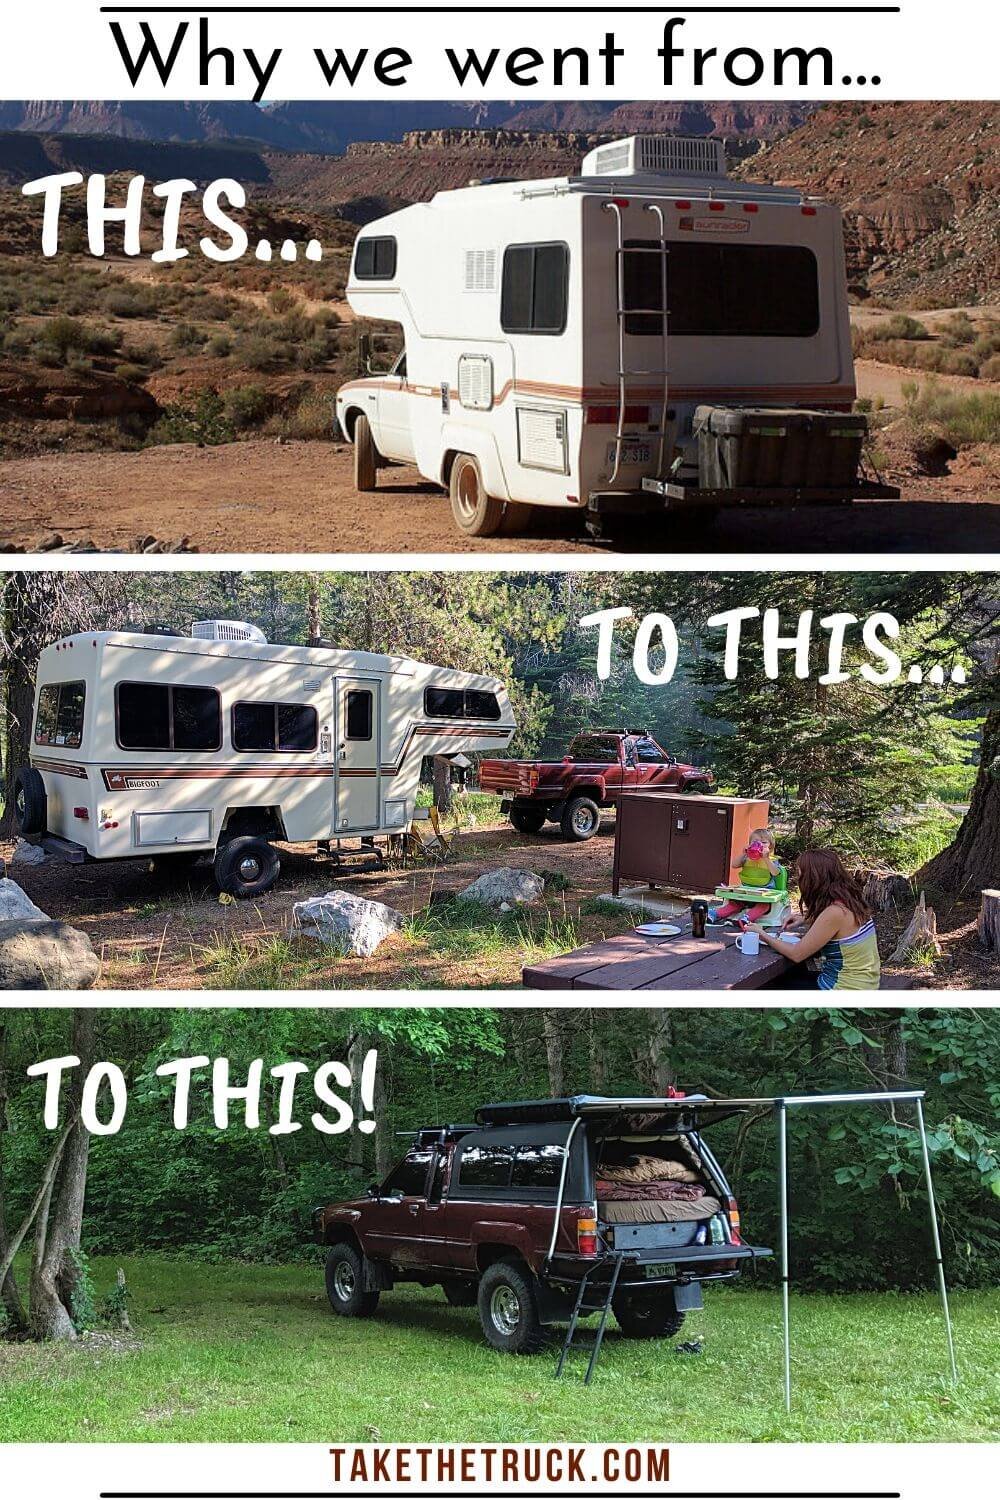 Overlanding with kids and truck bed camping as a family is a great way to explore together and bond! Read to hear this overlanding family’s transition from RV traveling to truck camping.